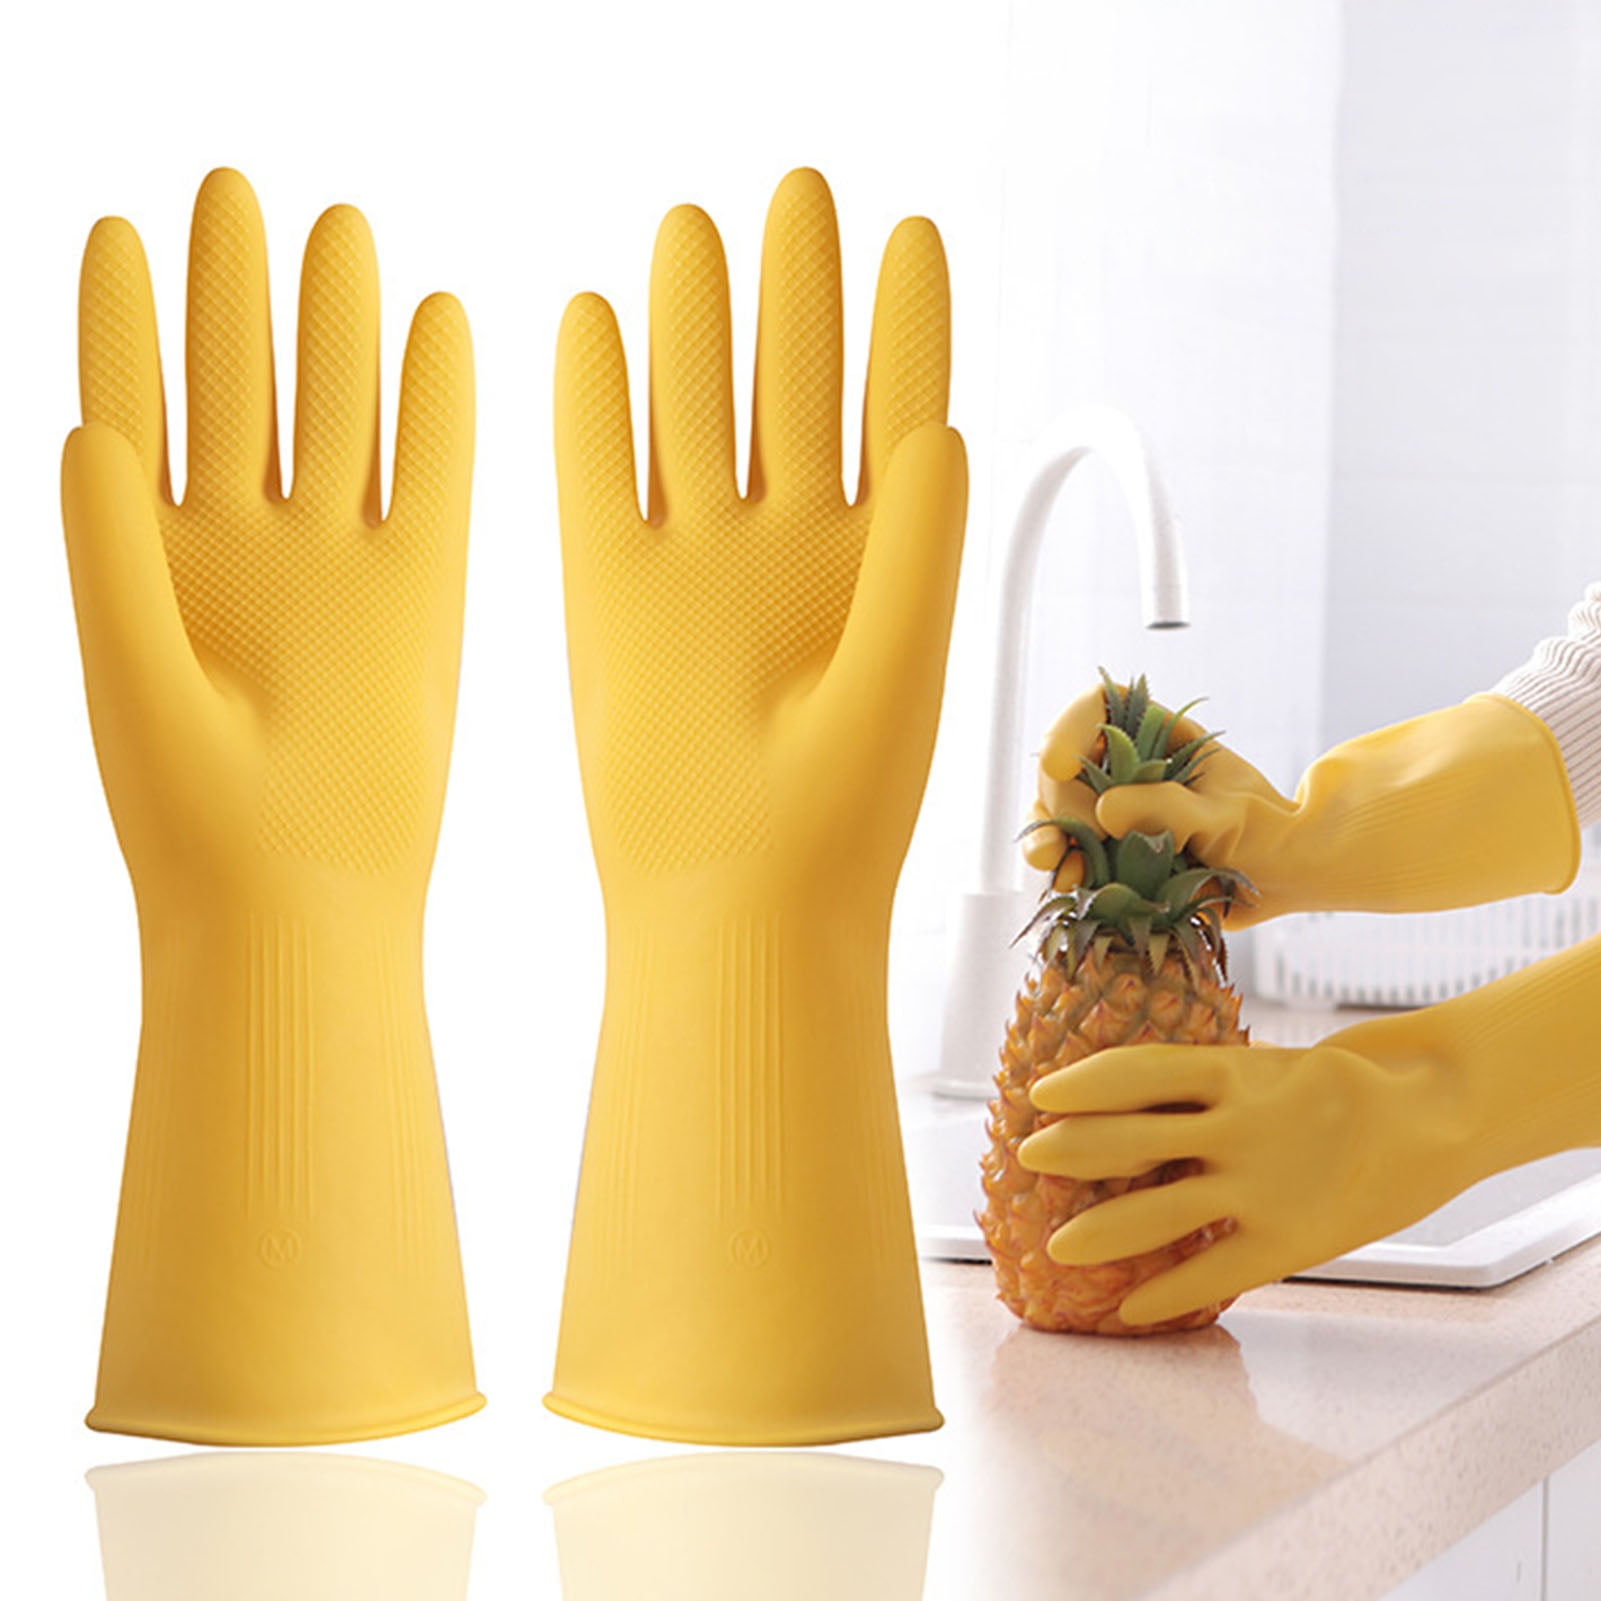 World of Confectioners - Oven and grill cleaner + gloves, microfiber and  brush - 500 ml - WoldoClean® - Household cleaning - Homeware